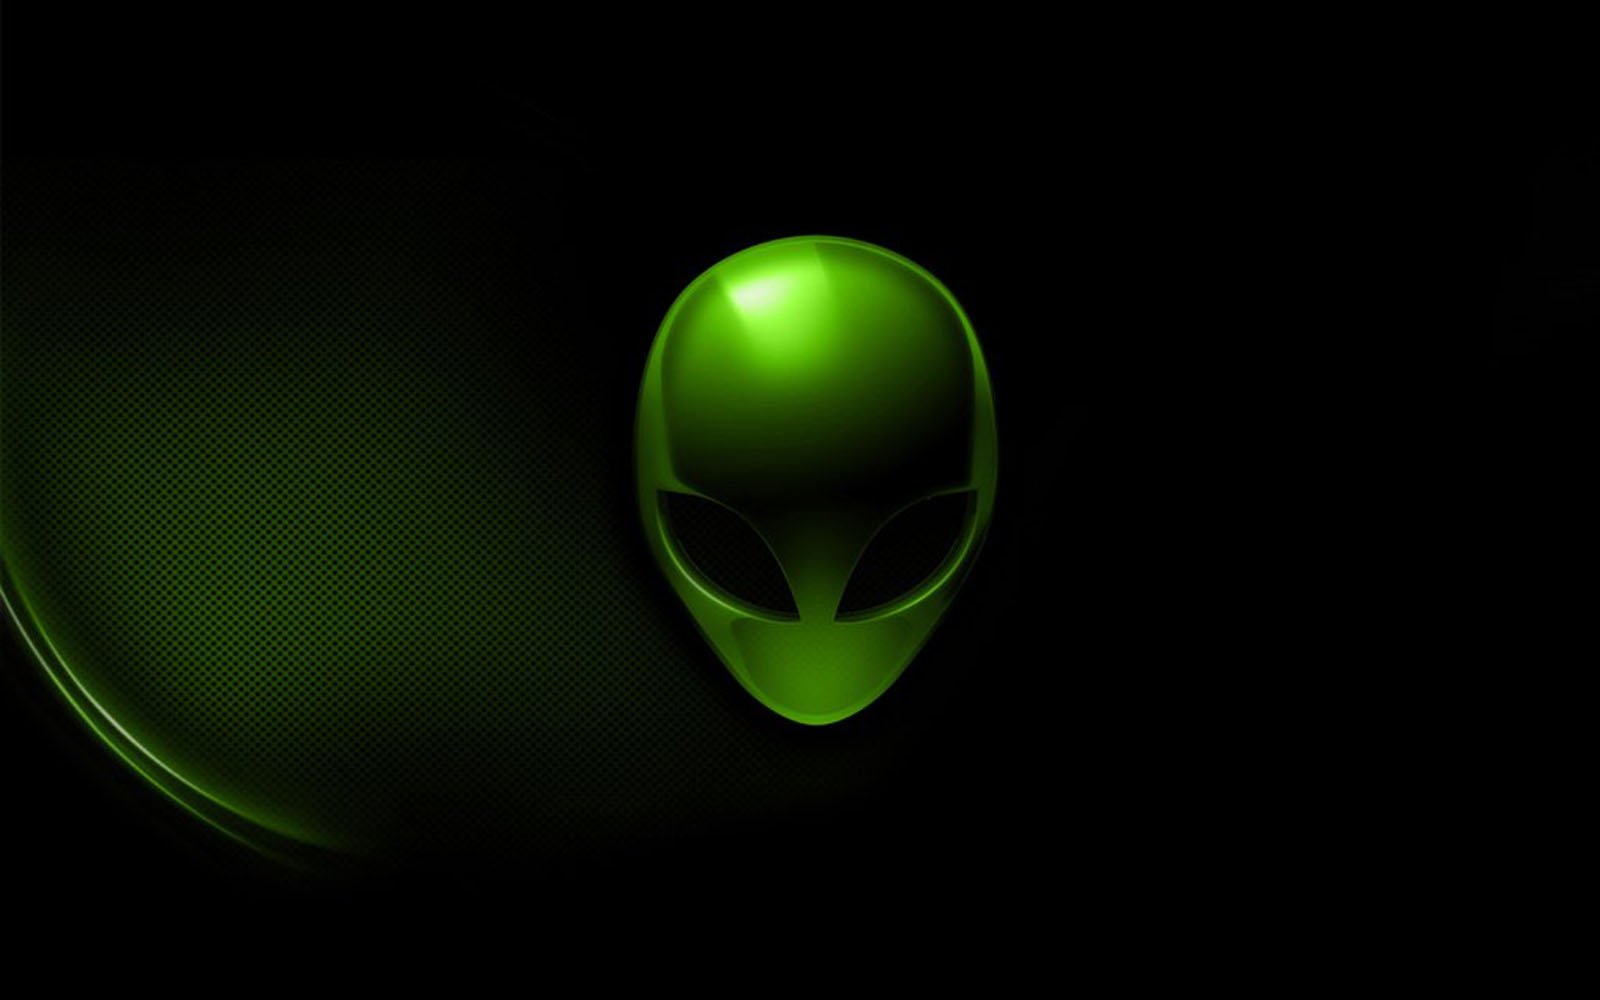 Tag Alienware Wallpapers Backgrounds Photos Images andPictures for